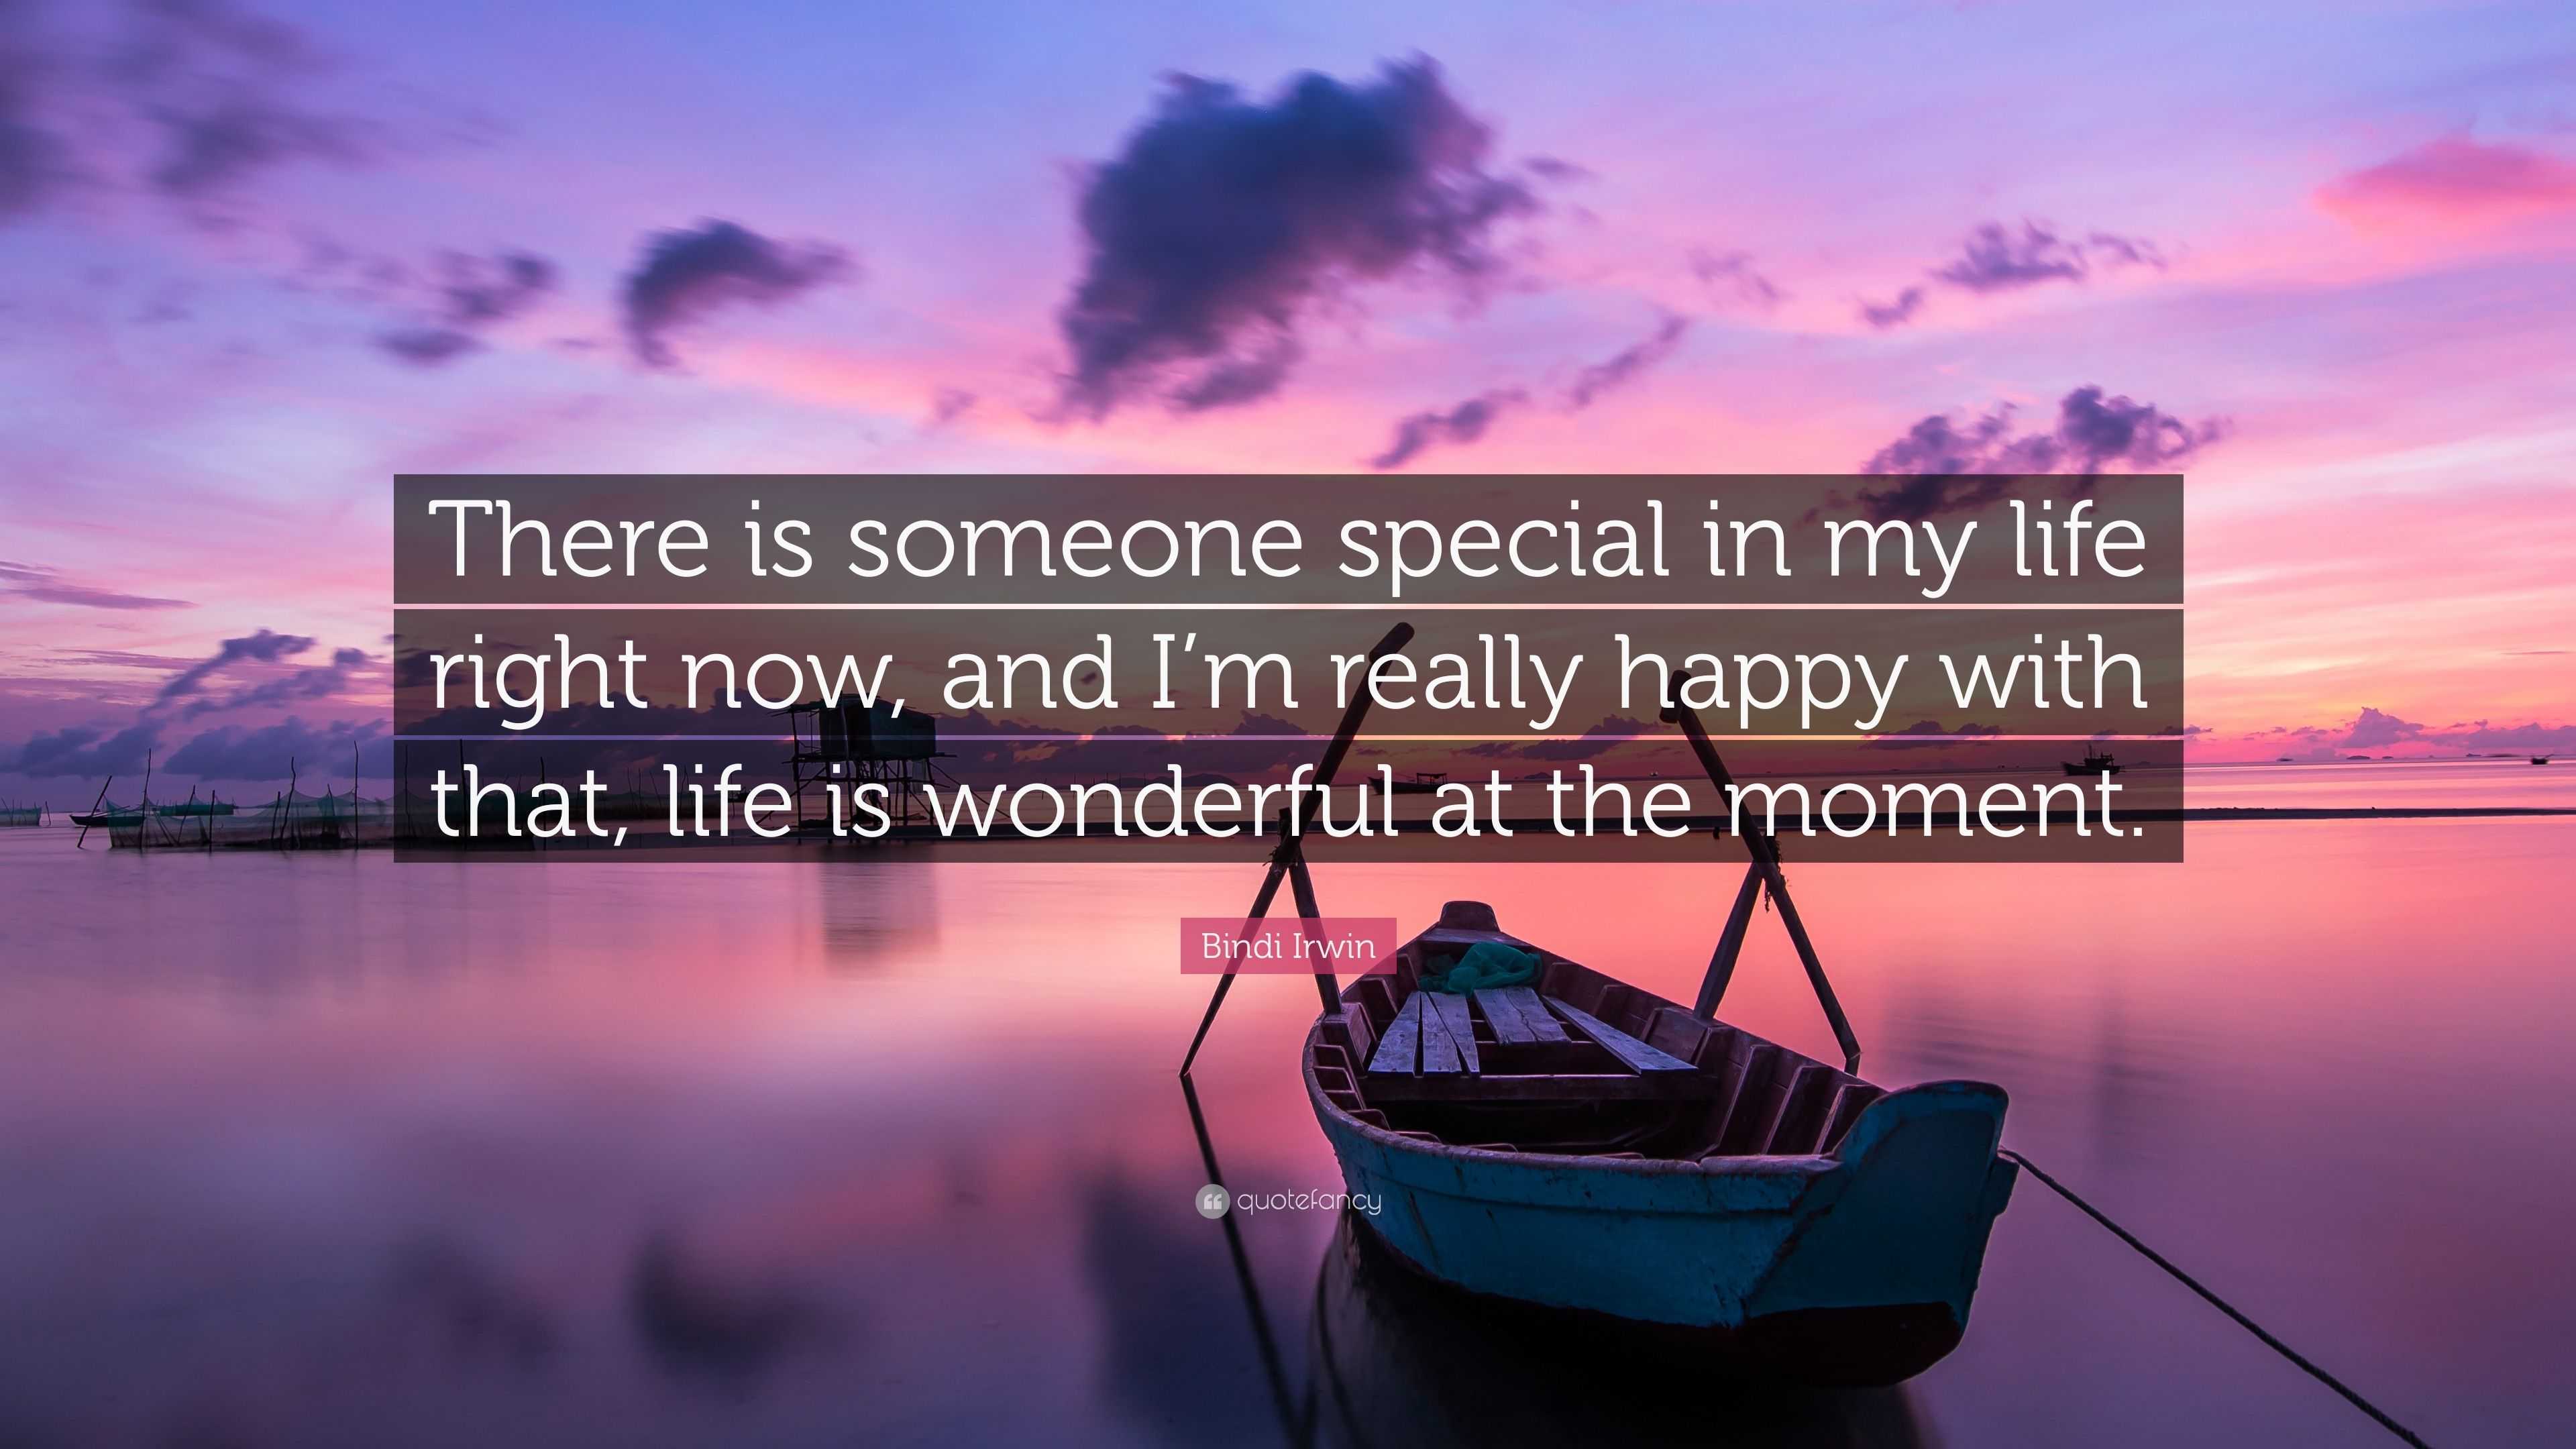 Bindi Irwin Quote: “There is someone special in my life right now, and